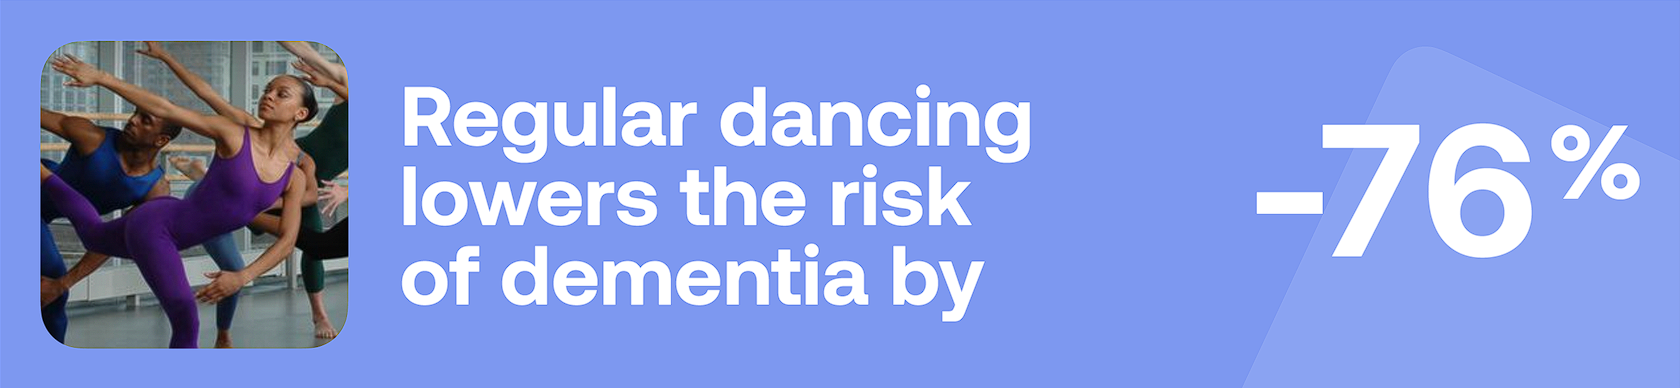 Regular dancing lowers the risk of dementia by -76%